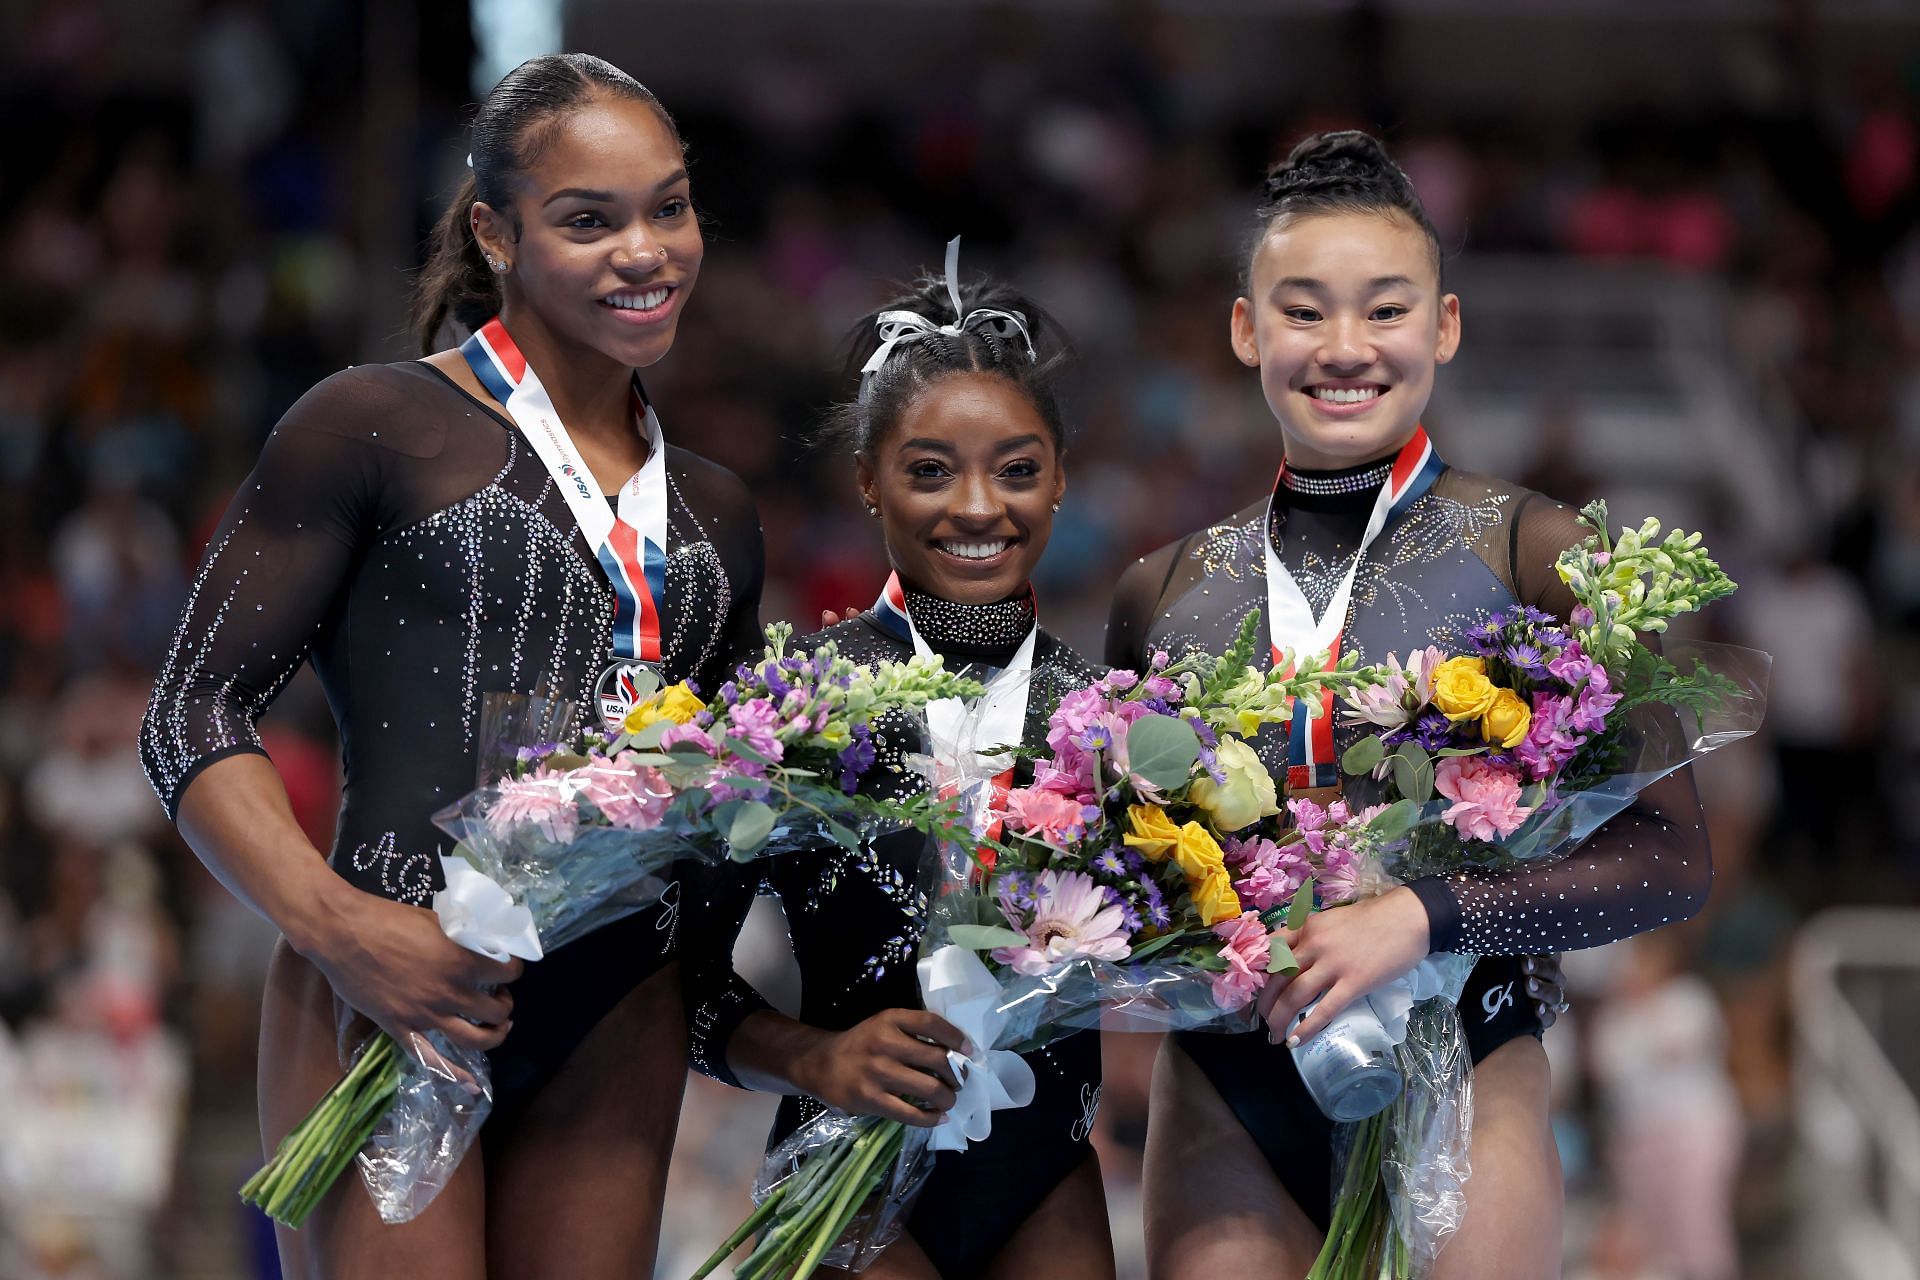 Shilese Jones, Simone Biles, and Leanne Wong at the 2023 U.S. Gymnastics Championships at SAP Centre in San Jose, California